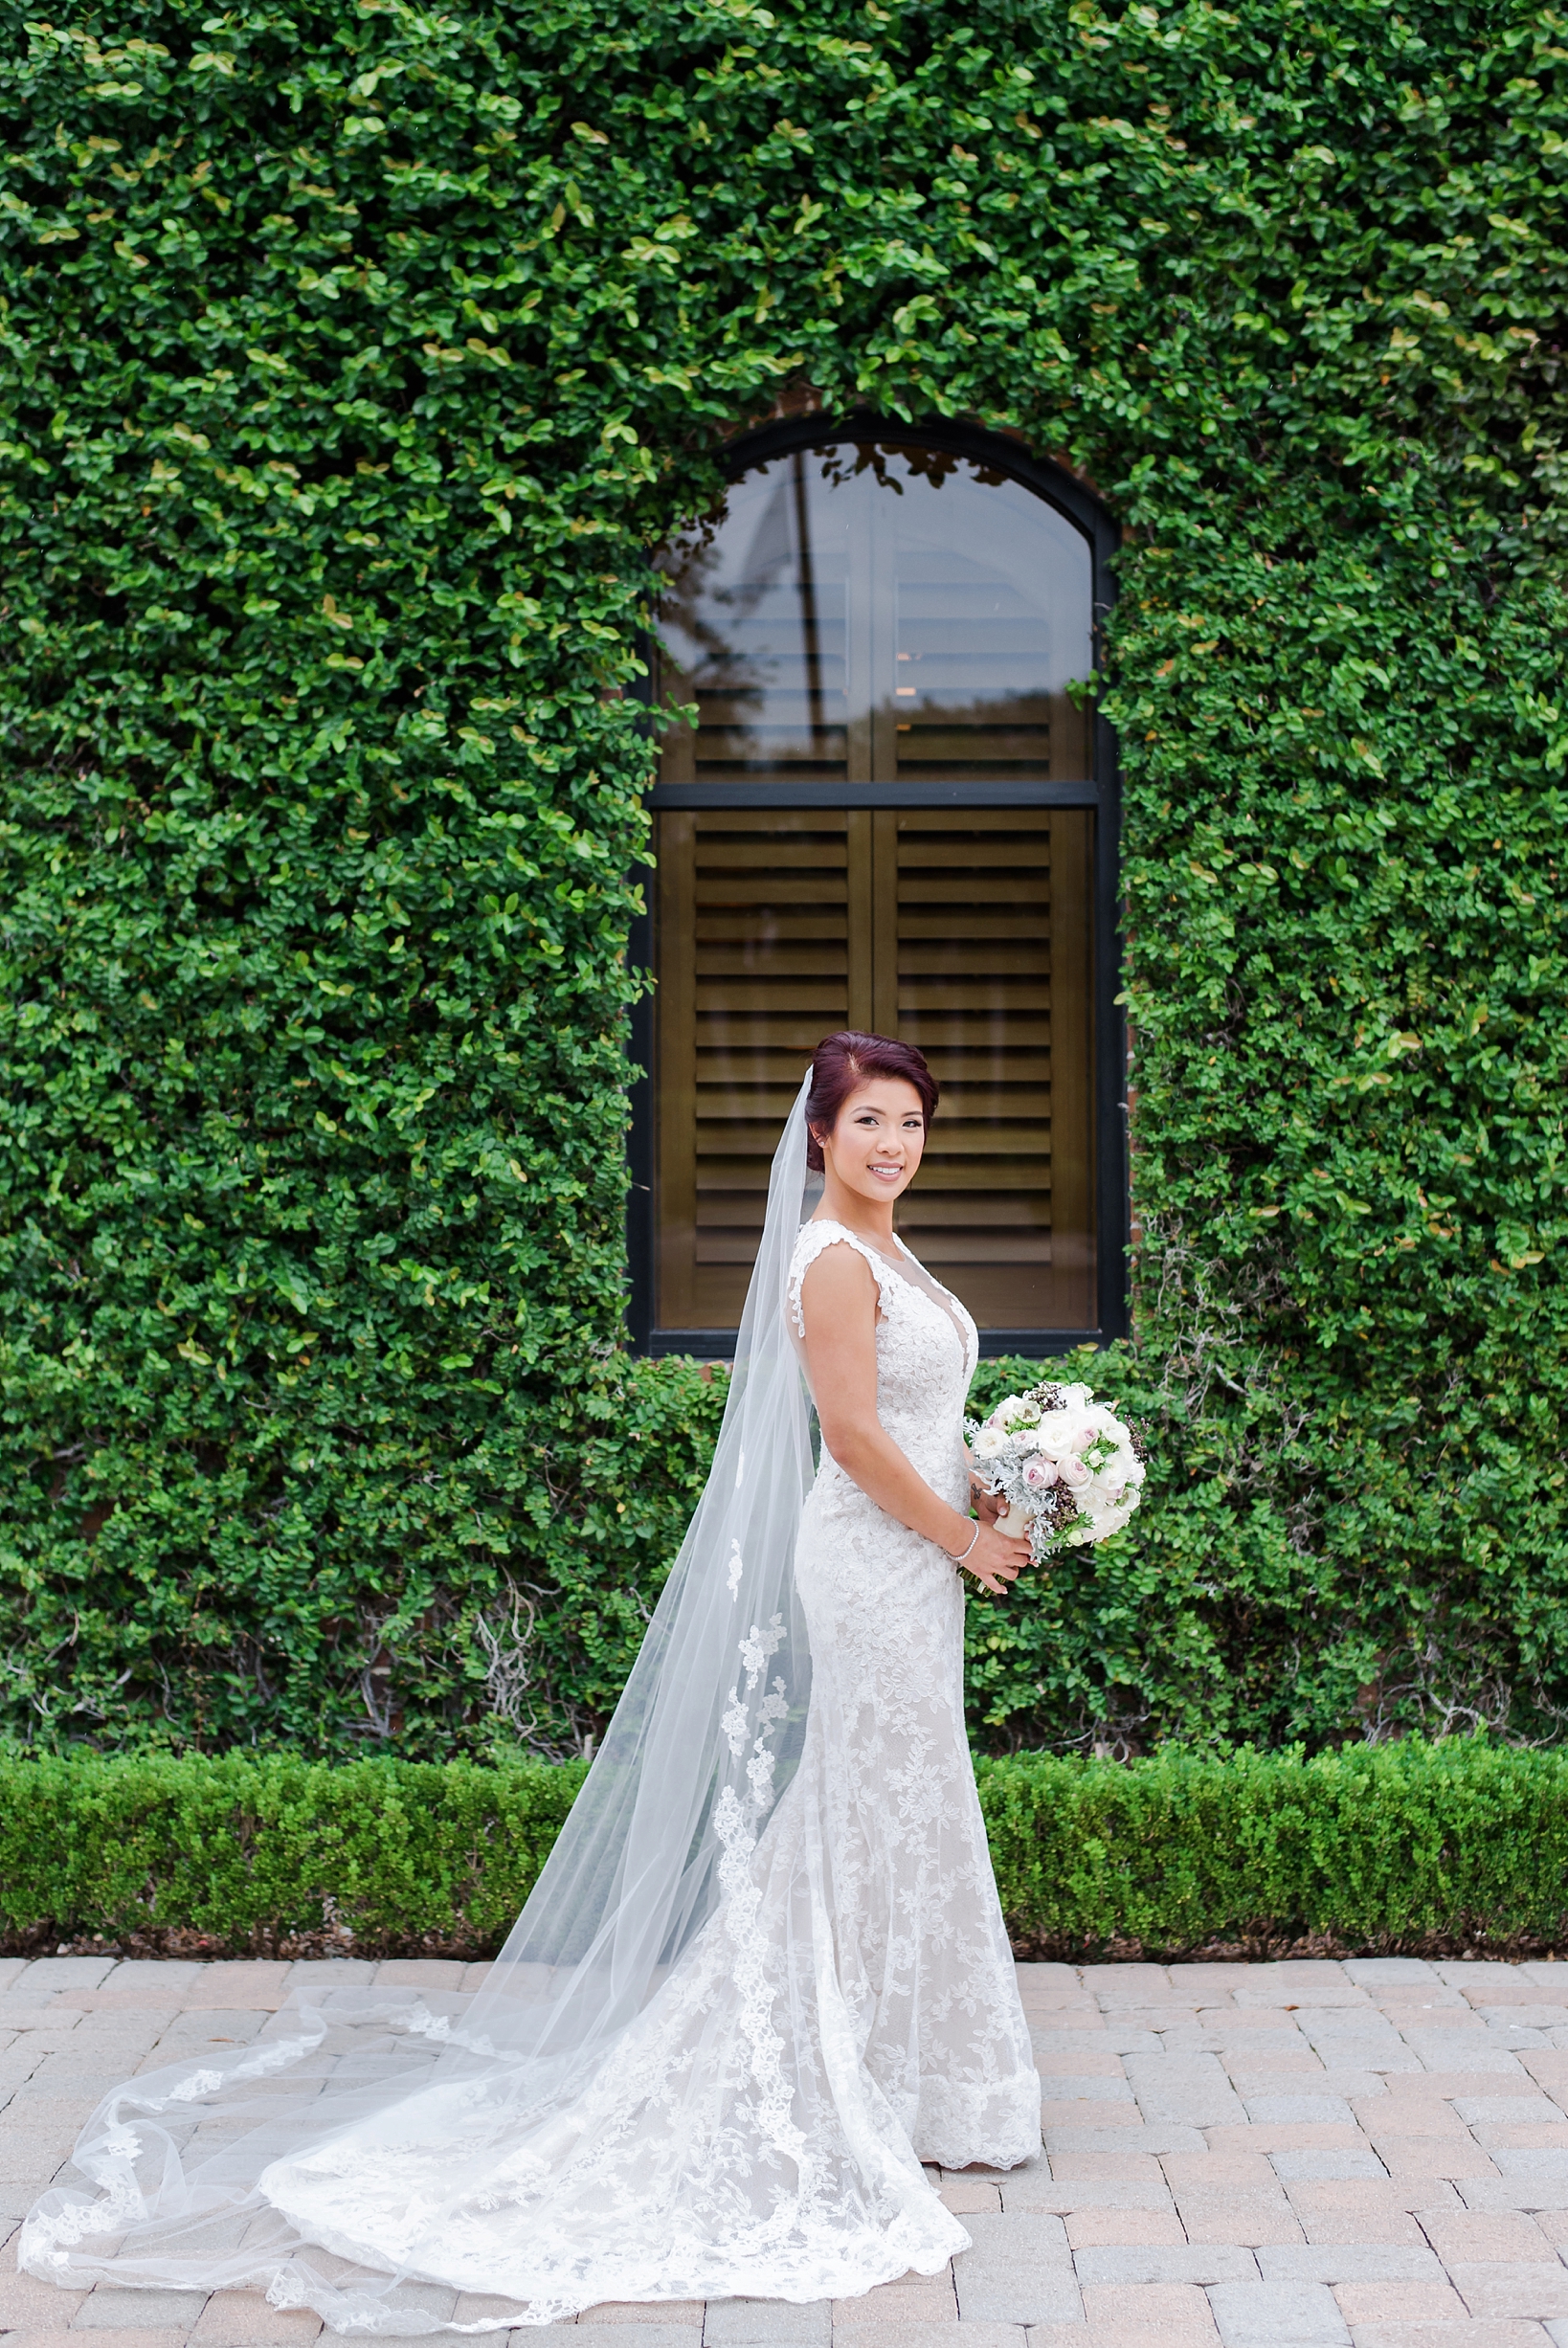 Bride with her cathedral veil and bouquet standing in front of a vine covered brick wall